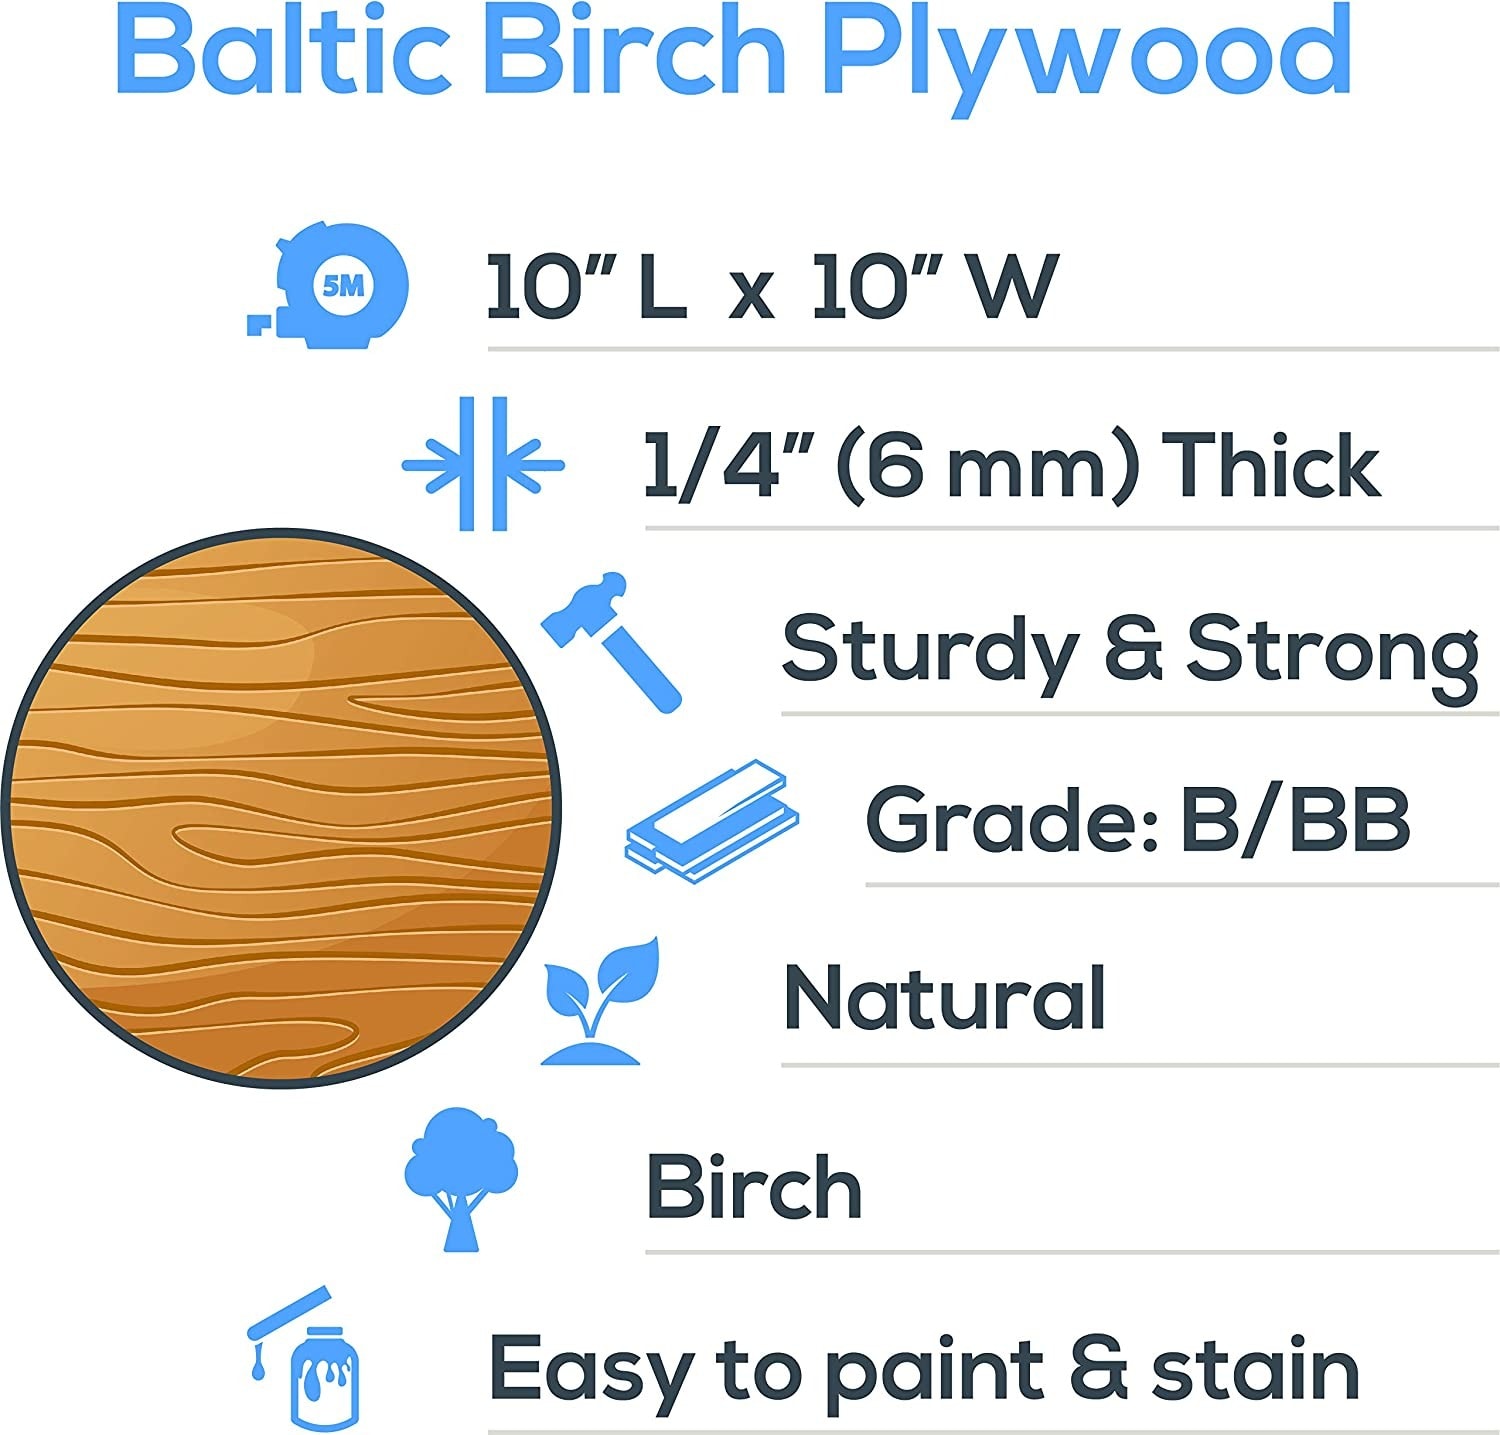 Baltic Birch Plywood, 3 mm 1/8 x 12 x 20 Inch Craft Wood, Pack of